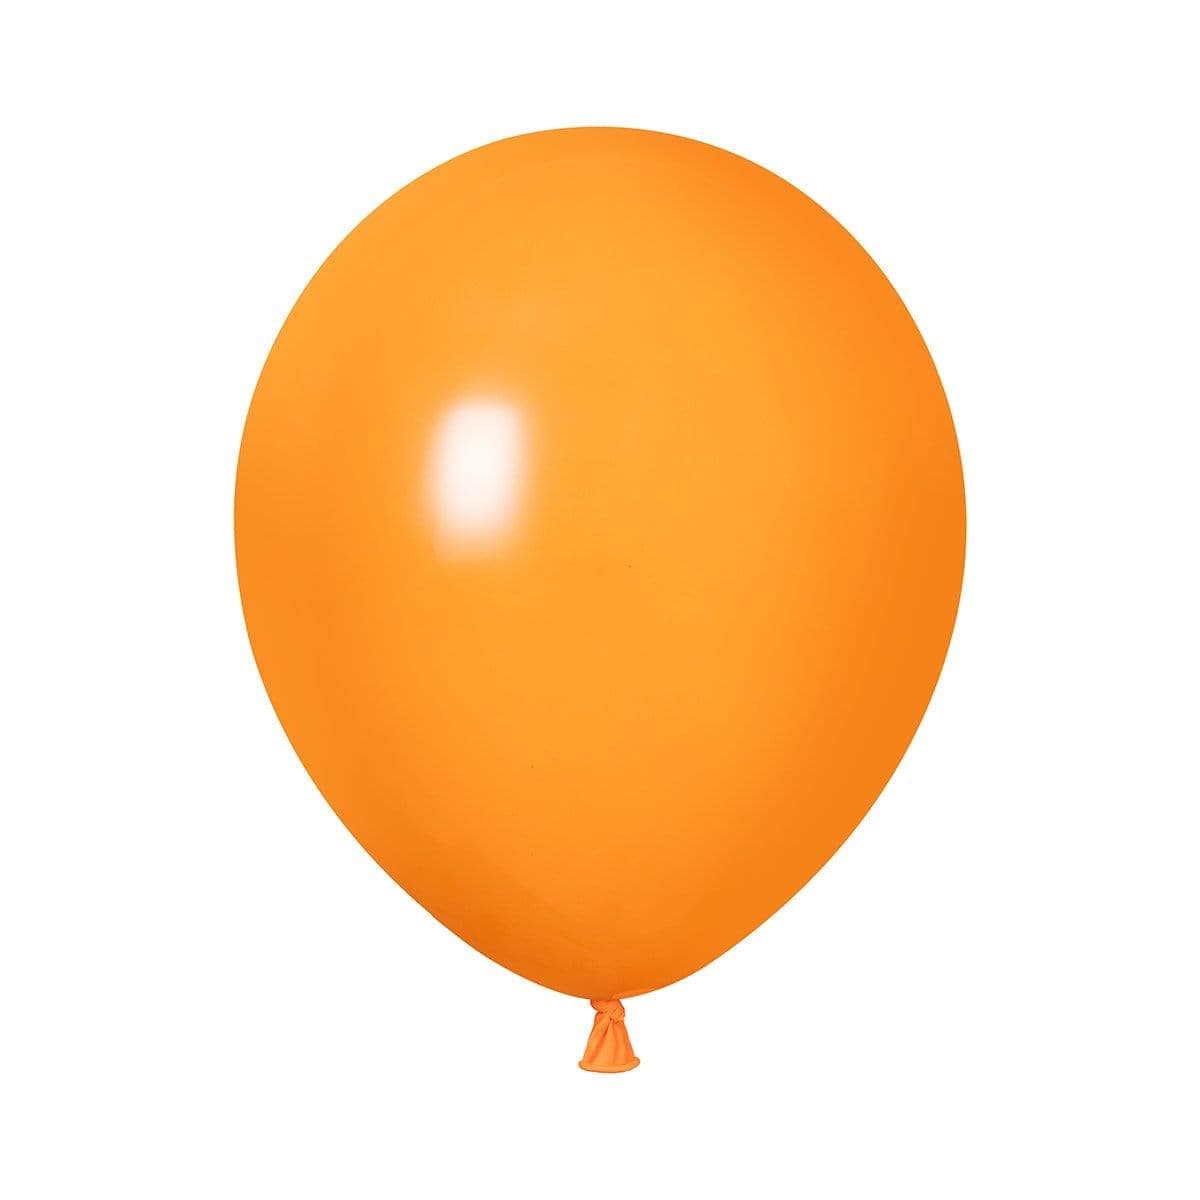 Buy Balloons Orange Latex Balloon 5 Inches, 100 Count sold at Party Expert